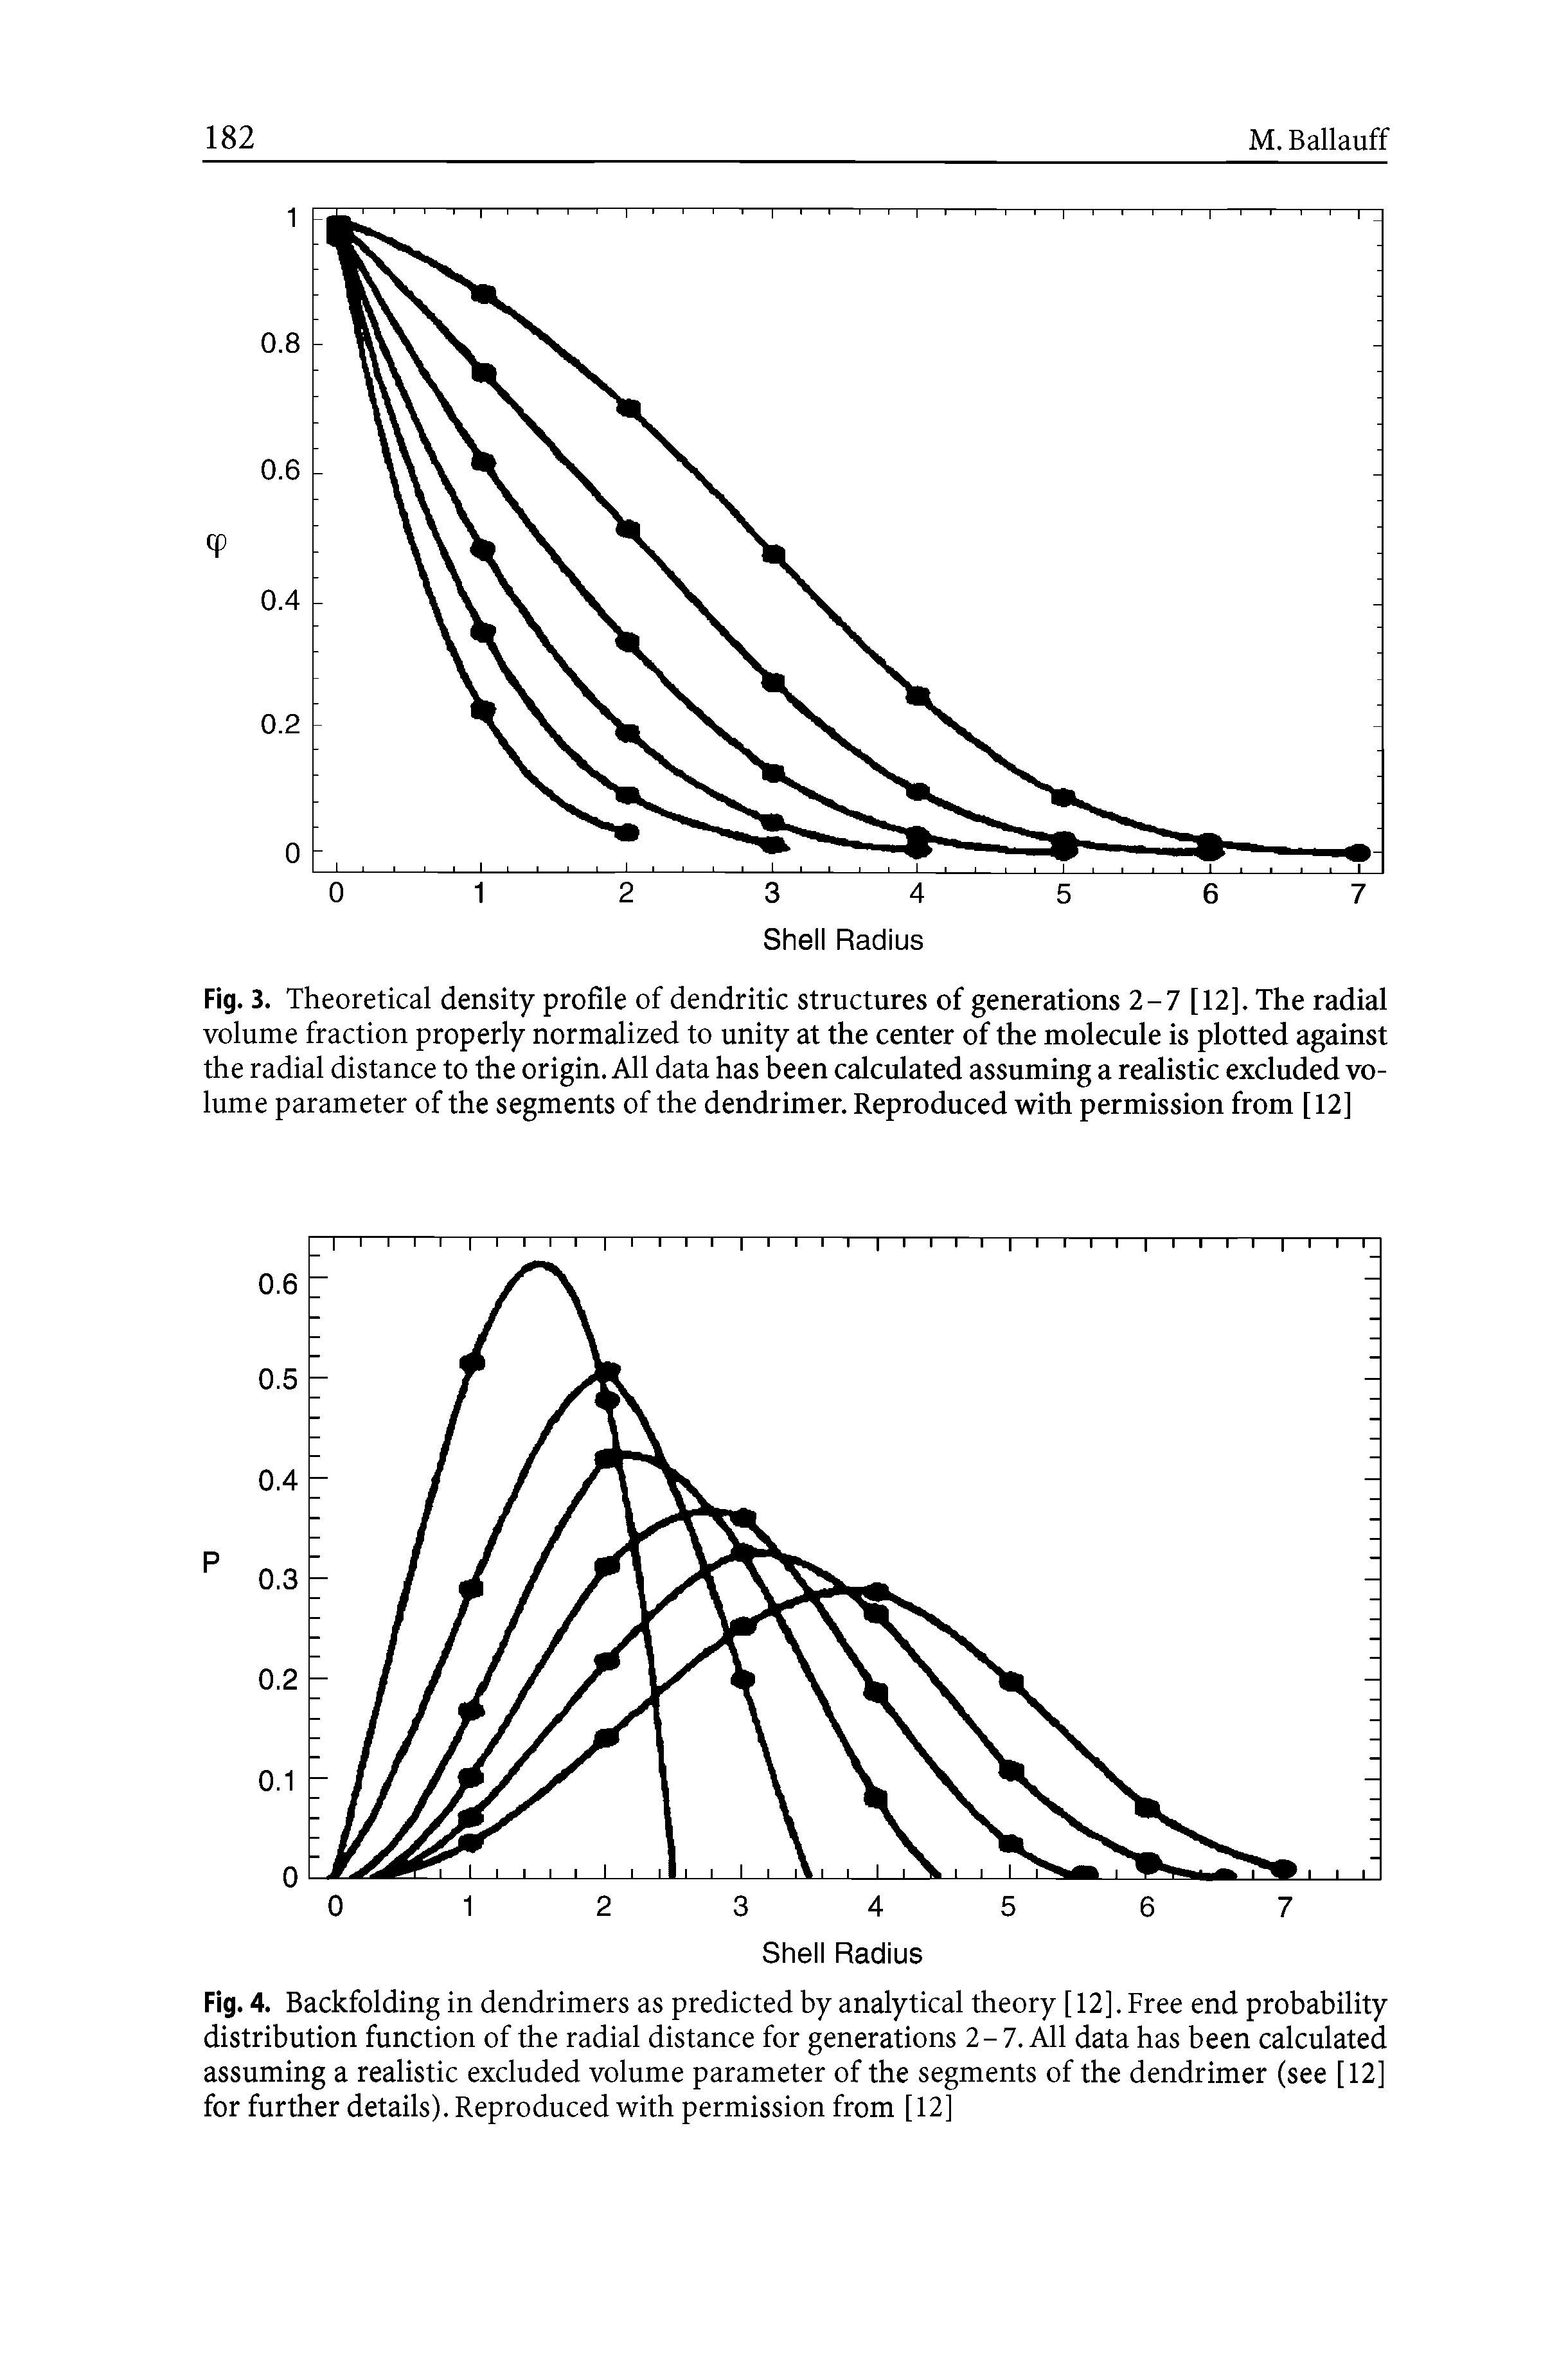 Fig. 3. Theoretical density profile of dendritic structures of generations 2-7 [12]. The radial volume fraction properly normalized to unity at the center of the molecule is plotted against the radial distance to the origin. All data has been calculated assuming a realistic excluded volume parameter of the segments of the dendrimer. Reproduced with permission from [12]...